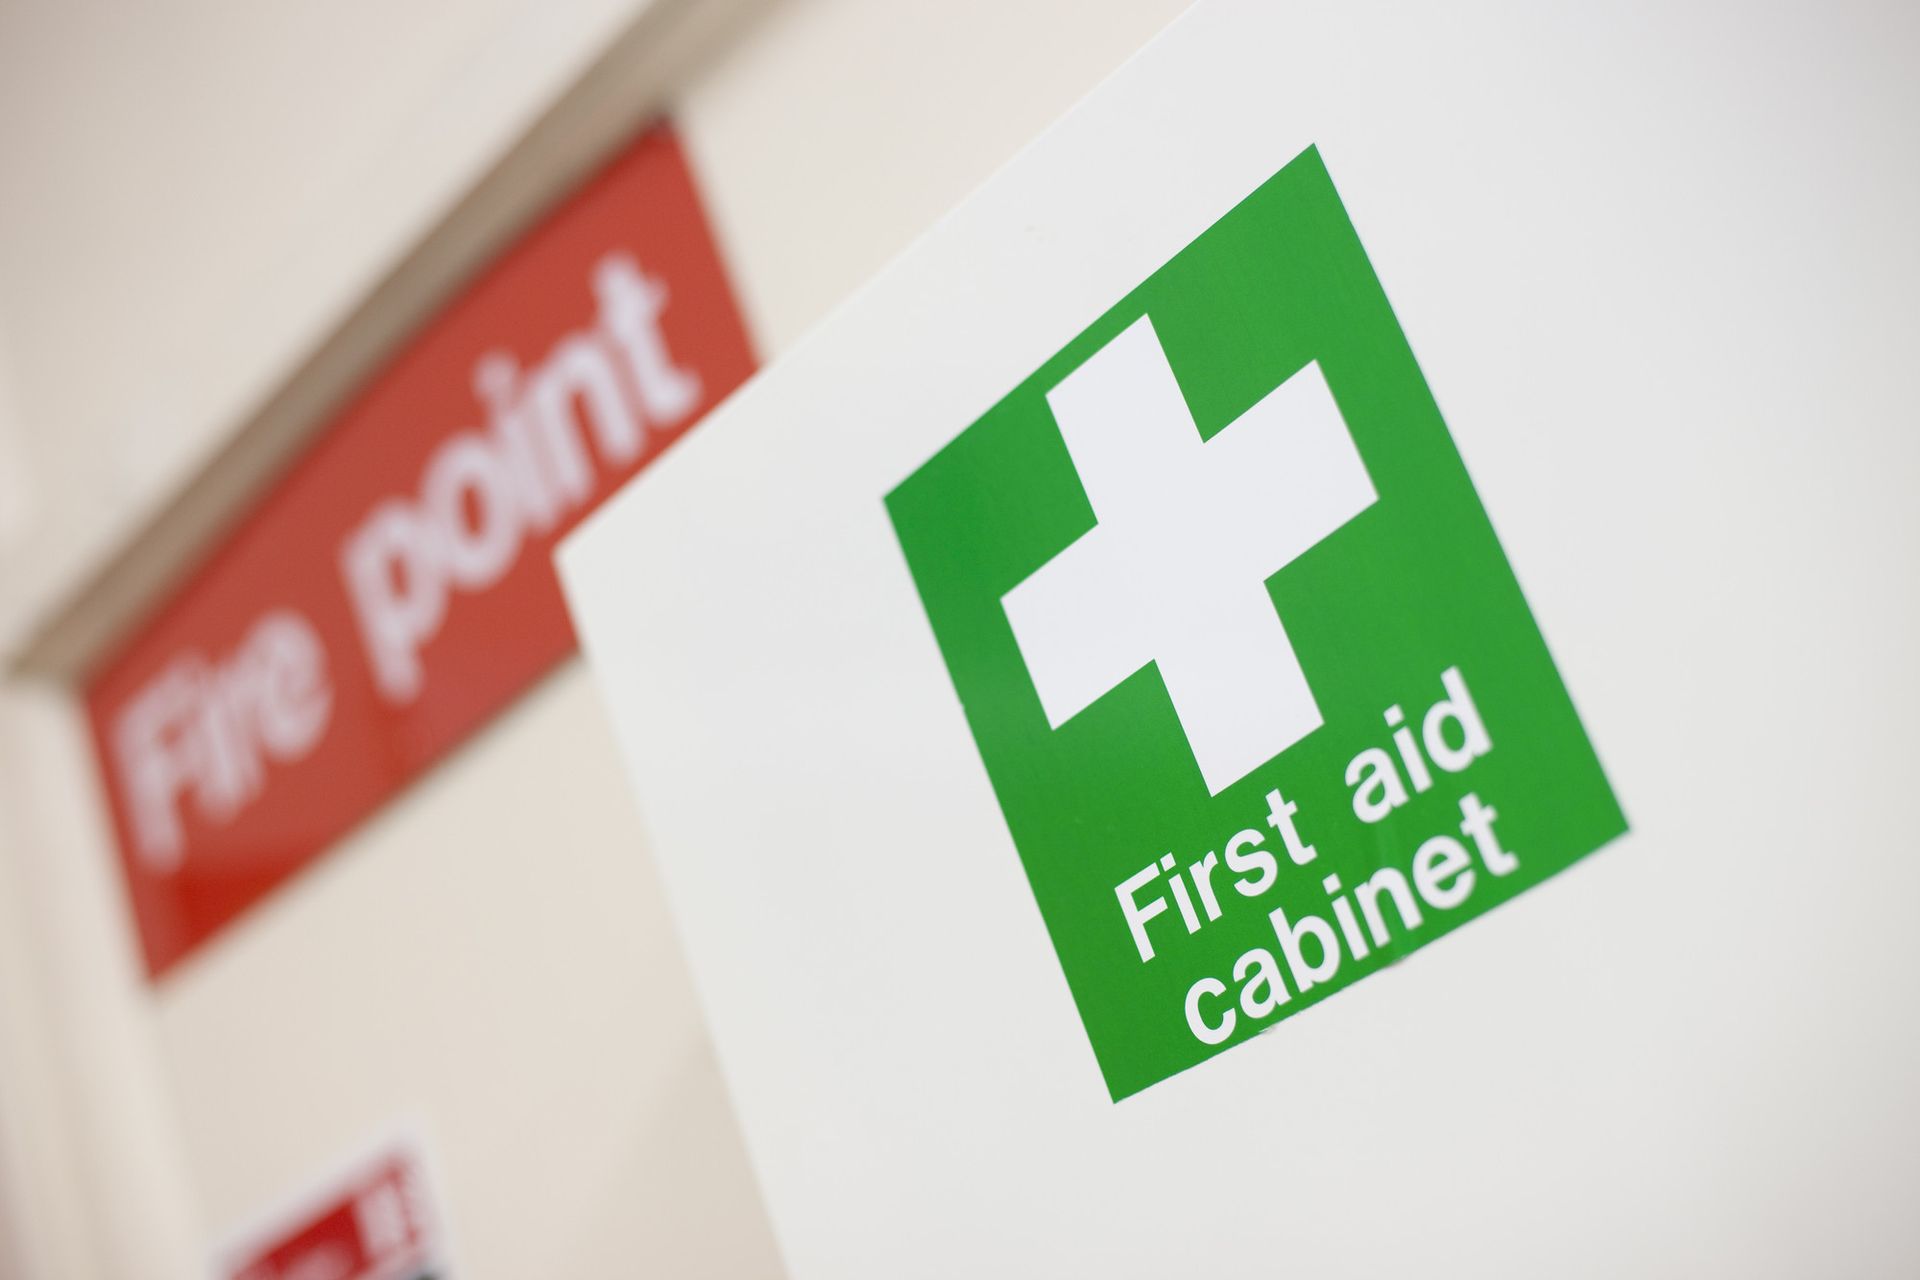 a first aid cabinet with a white cross on it and a fire point sign in the background